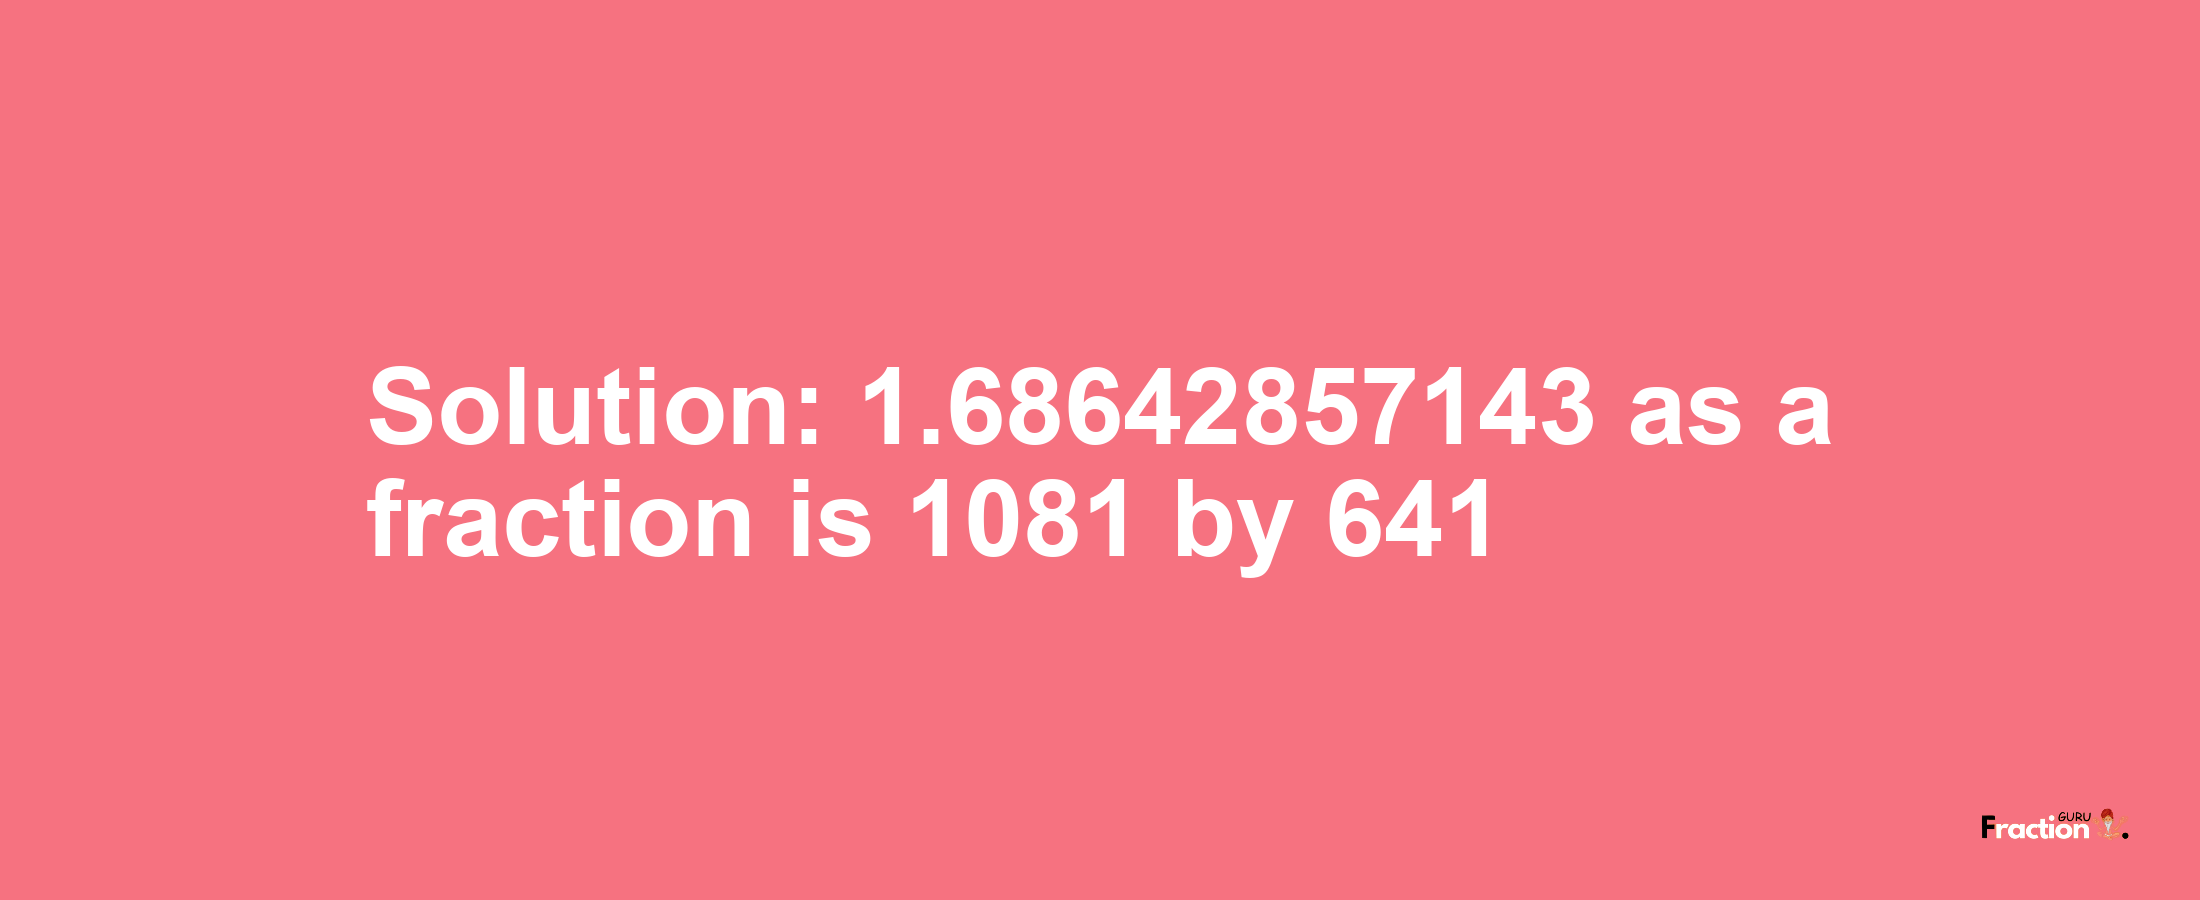 Solution:1.68642857143 as a fraction is 1081/641